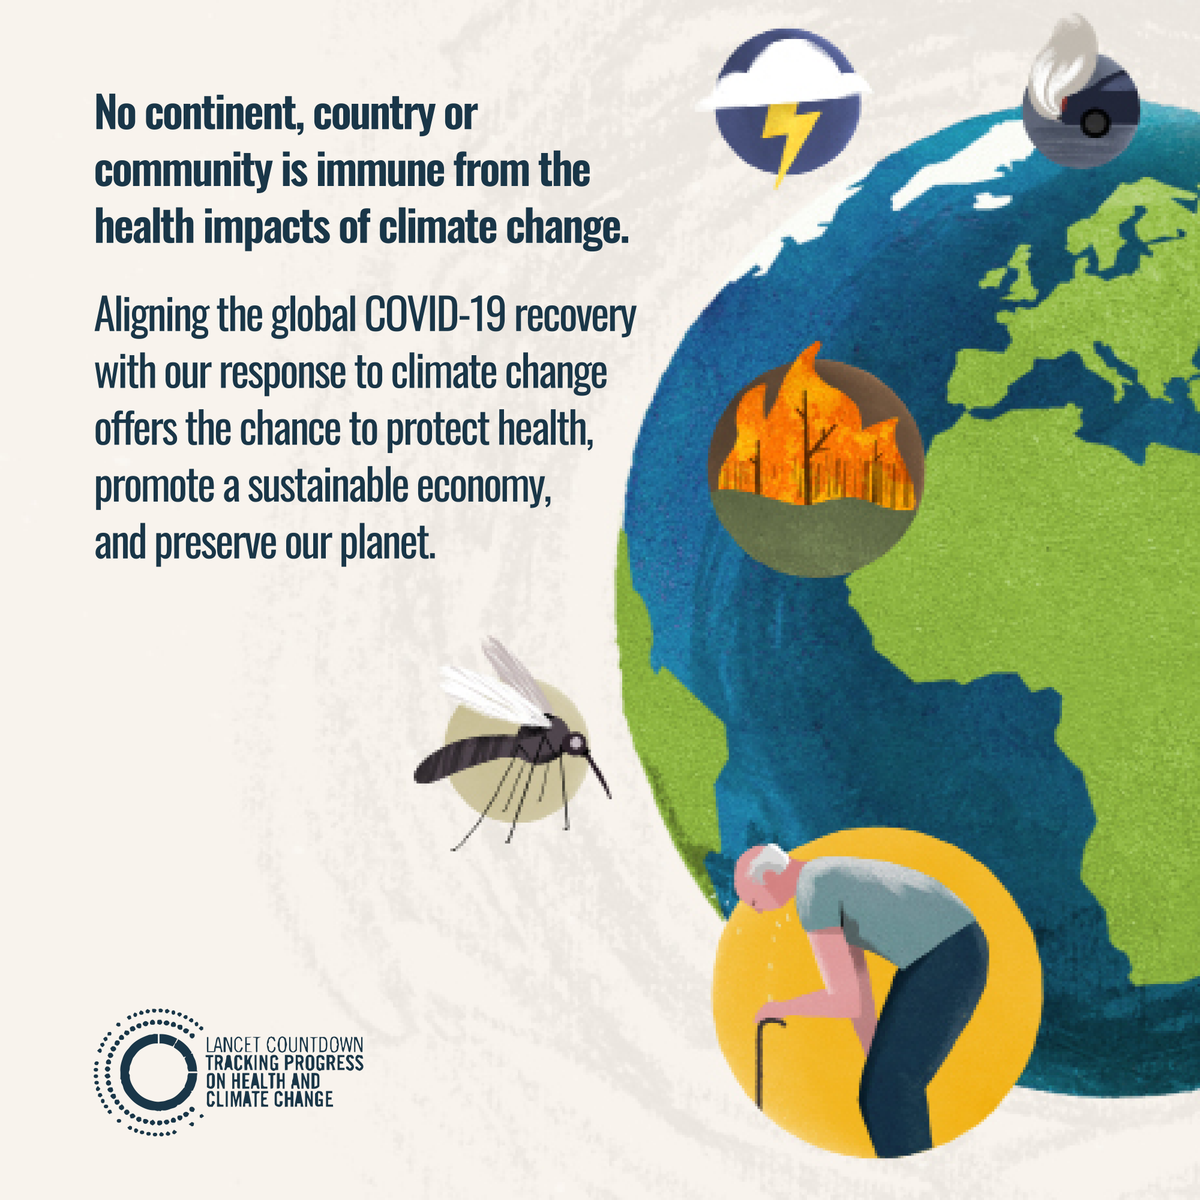 NEW—No country is immune from health impacts of worsening climate change. Unless urgent action is taken,  #climatechange will threaten global health, disrupt lives & livelihoods, & overwhelm health-care systems: 2020  @LancetCountdown report  #LancetClimate20  https://hubs.li/H0BTs0p0 